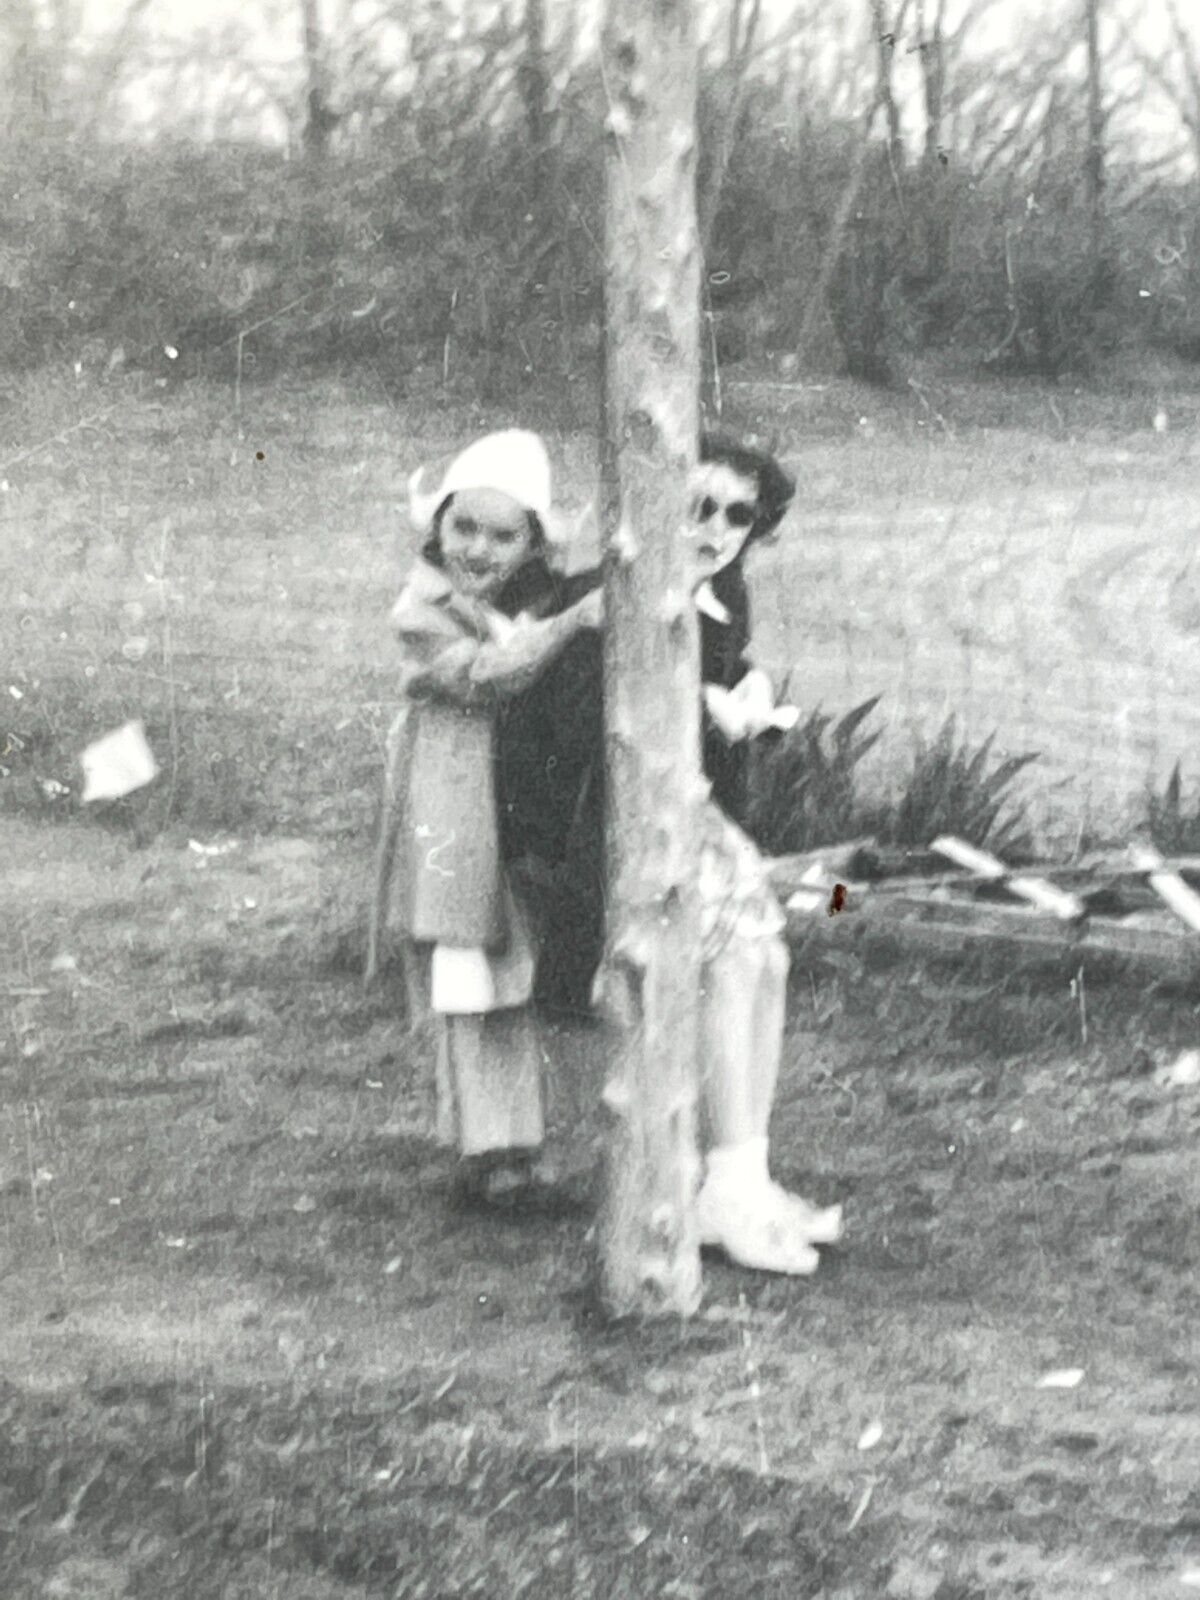 A8 Photograph Girls Trying To Hide Behind Tree 1950's